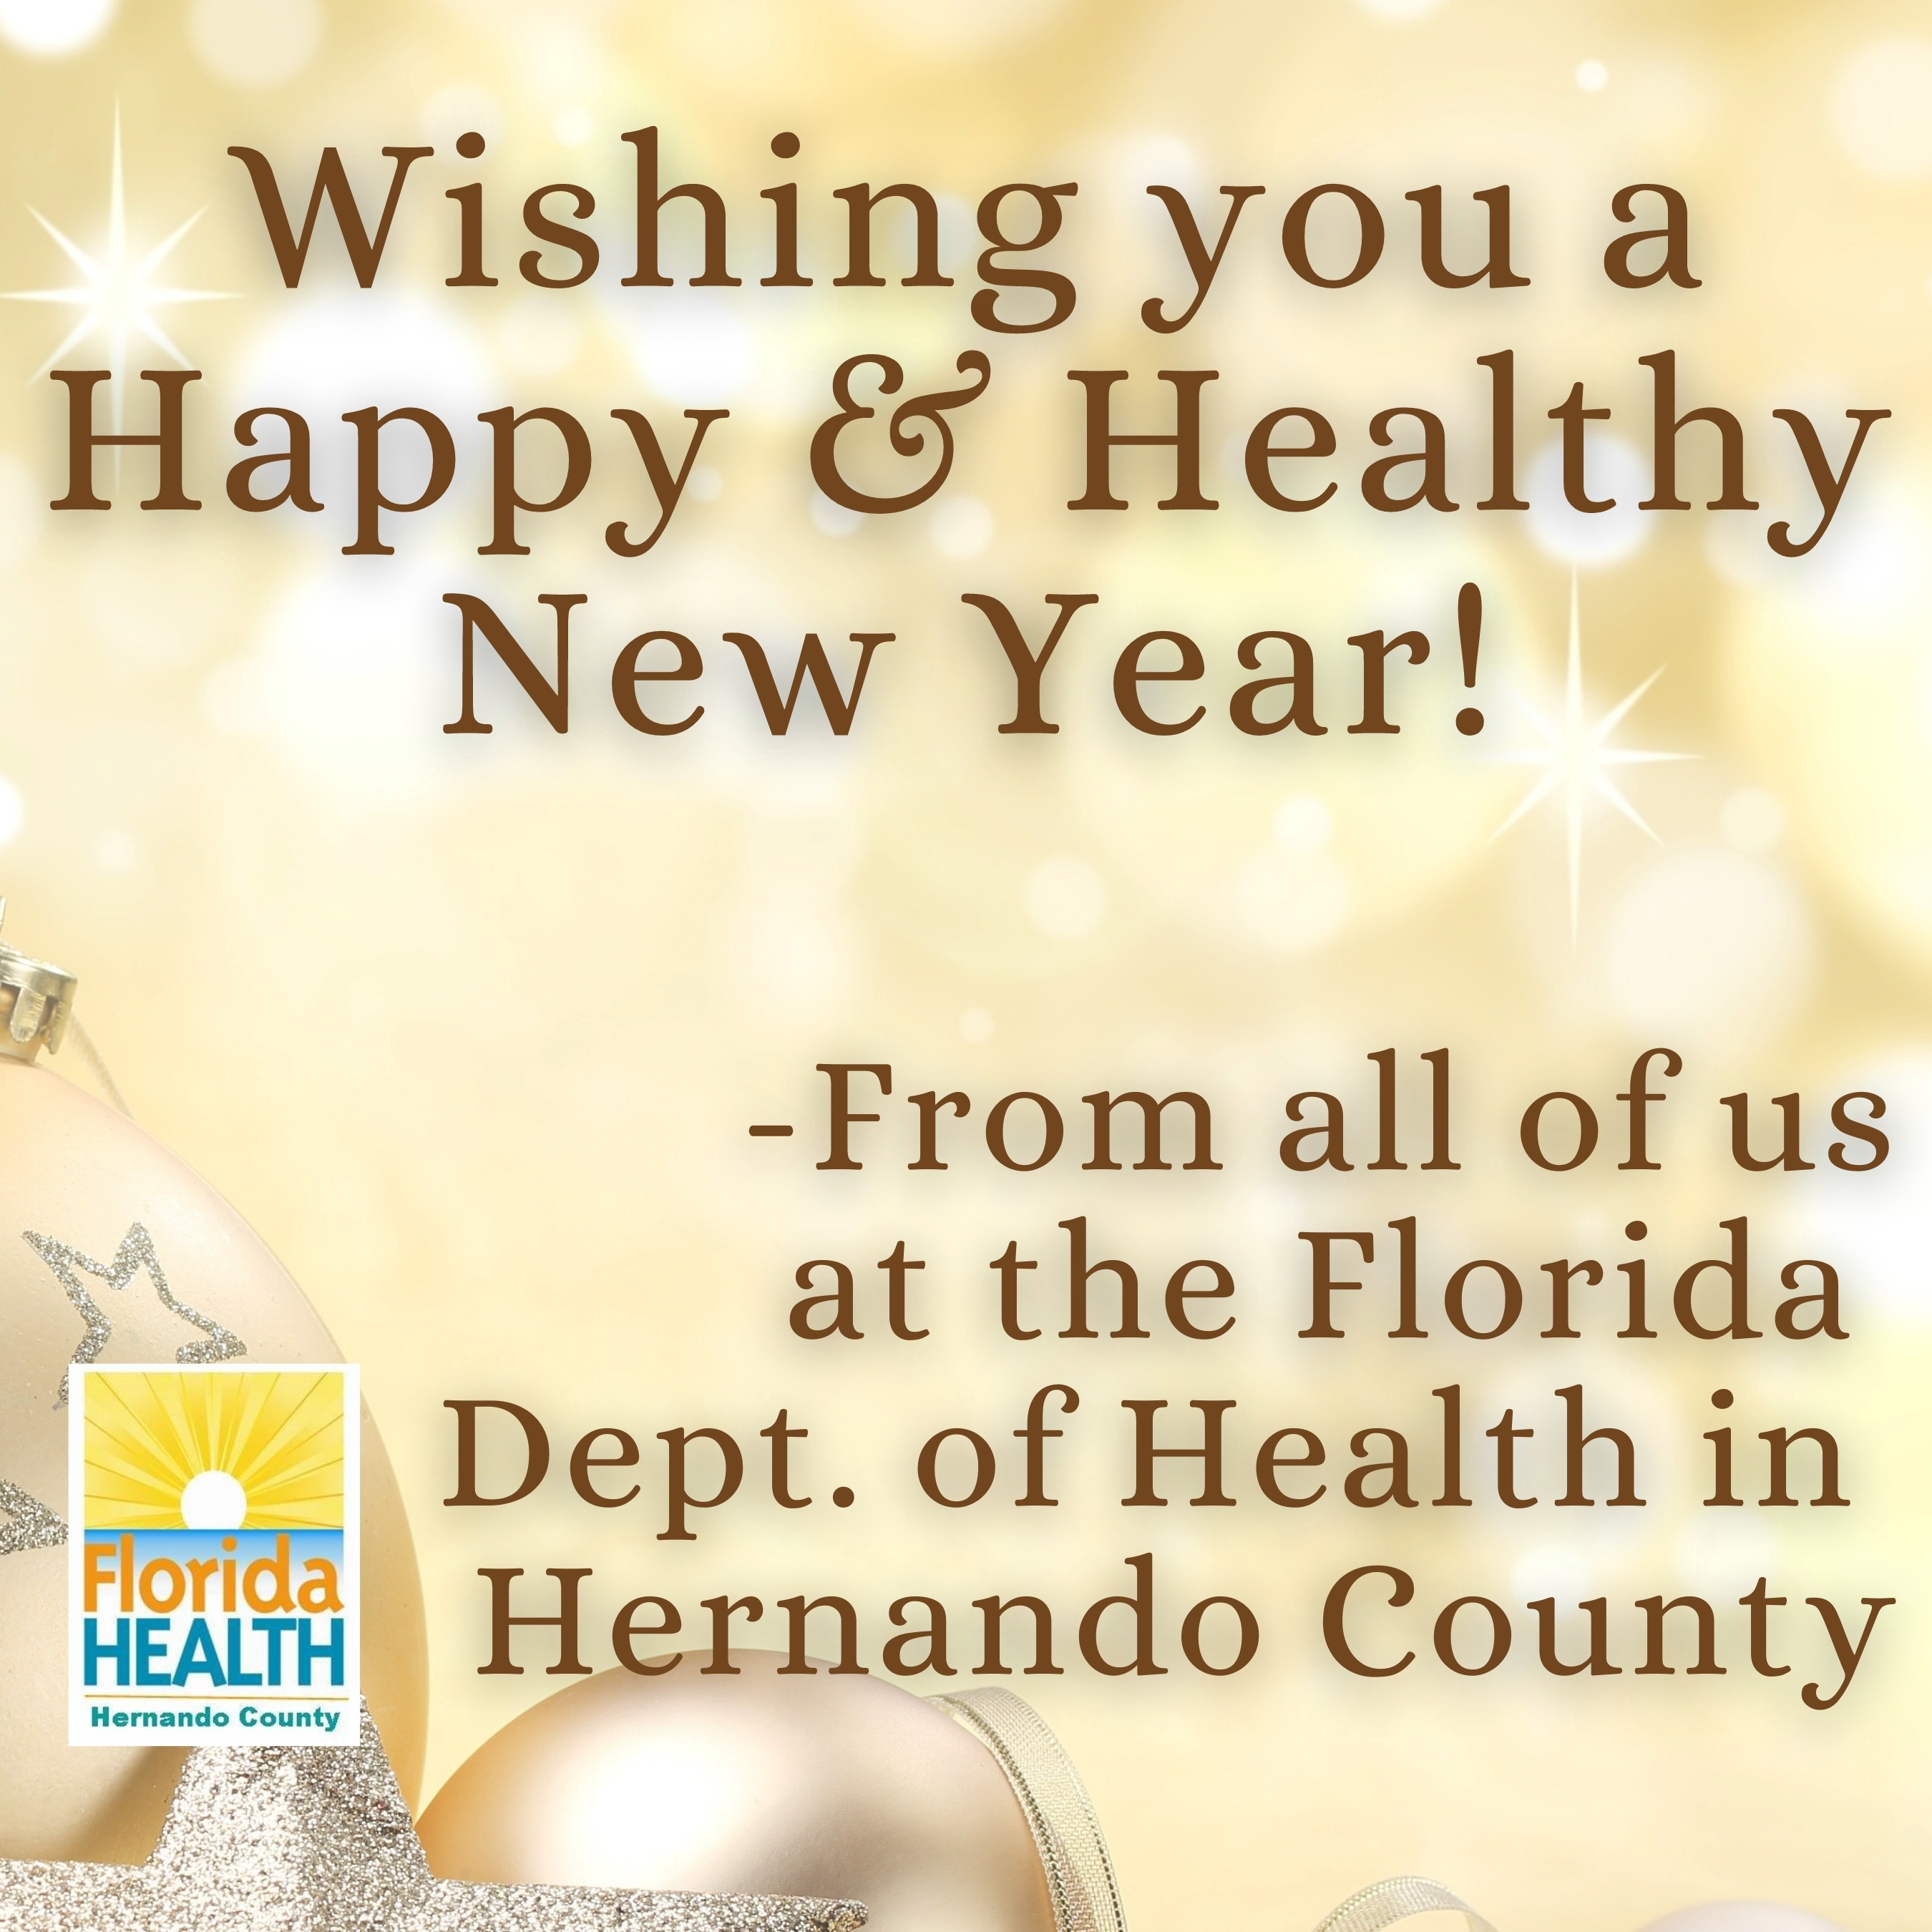 Happy Healthy New Year from the Florida Department of Health in Hernando County